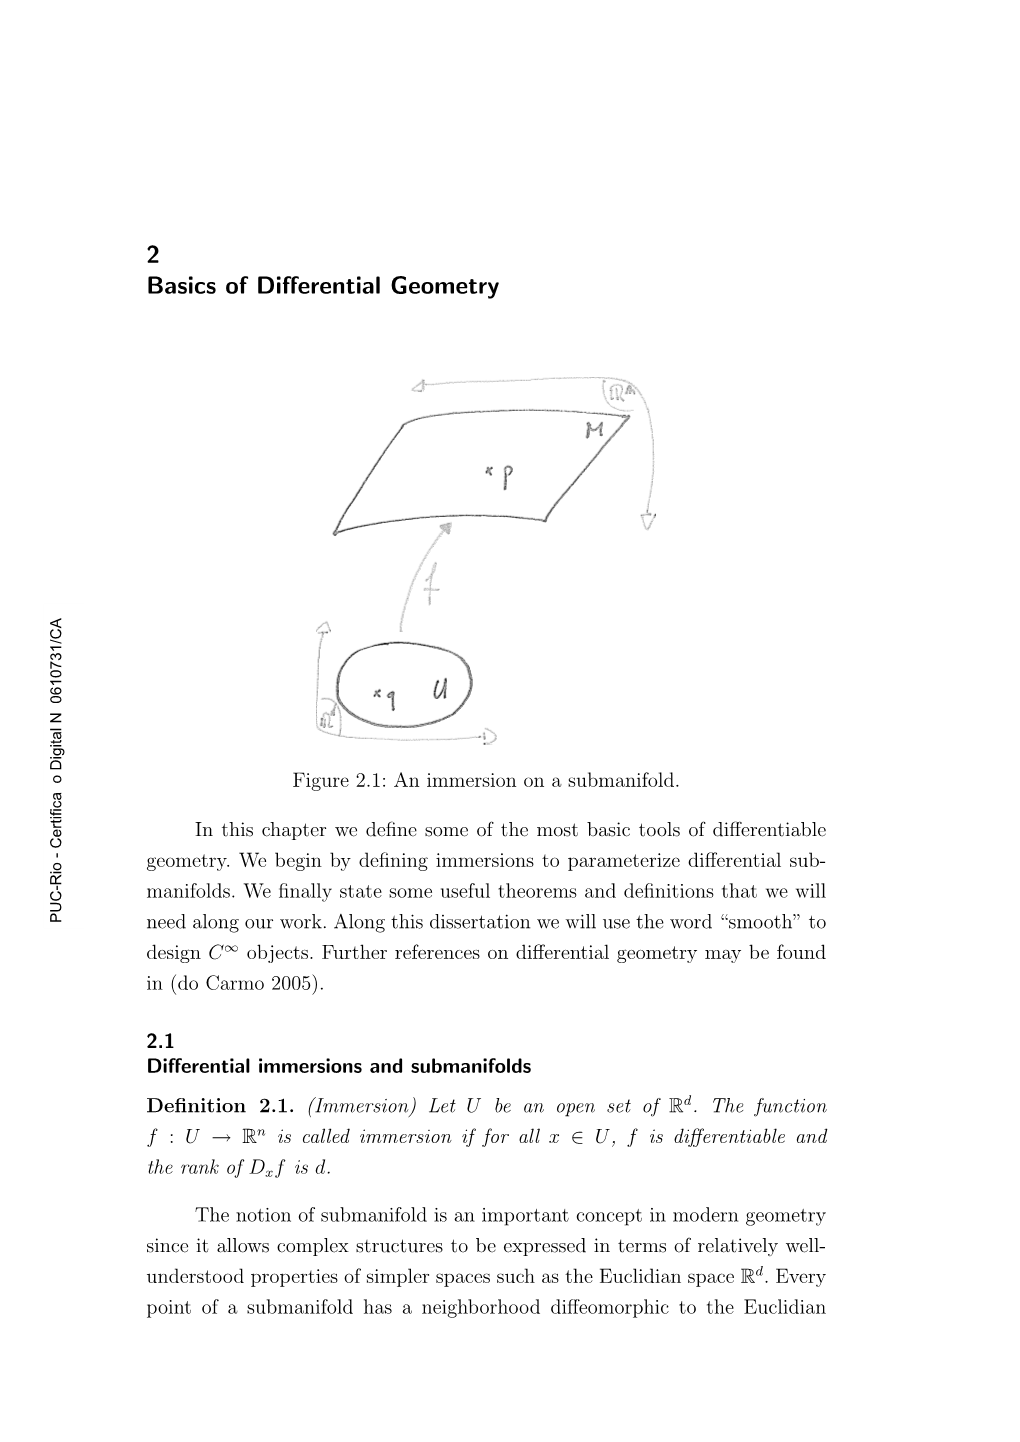 2 Basics of Differential Geometry